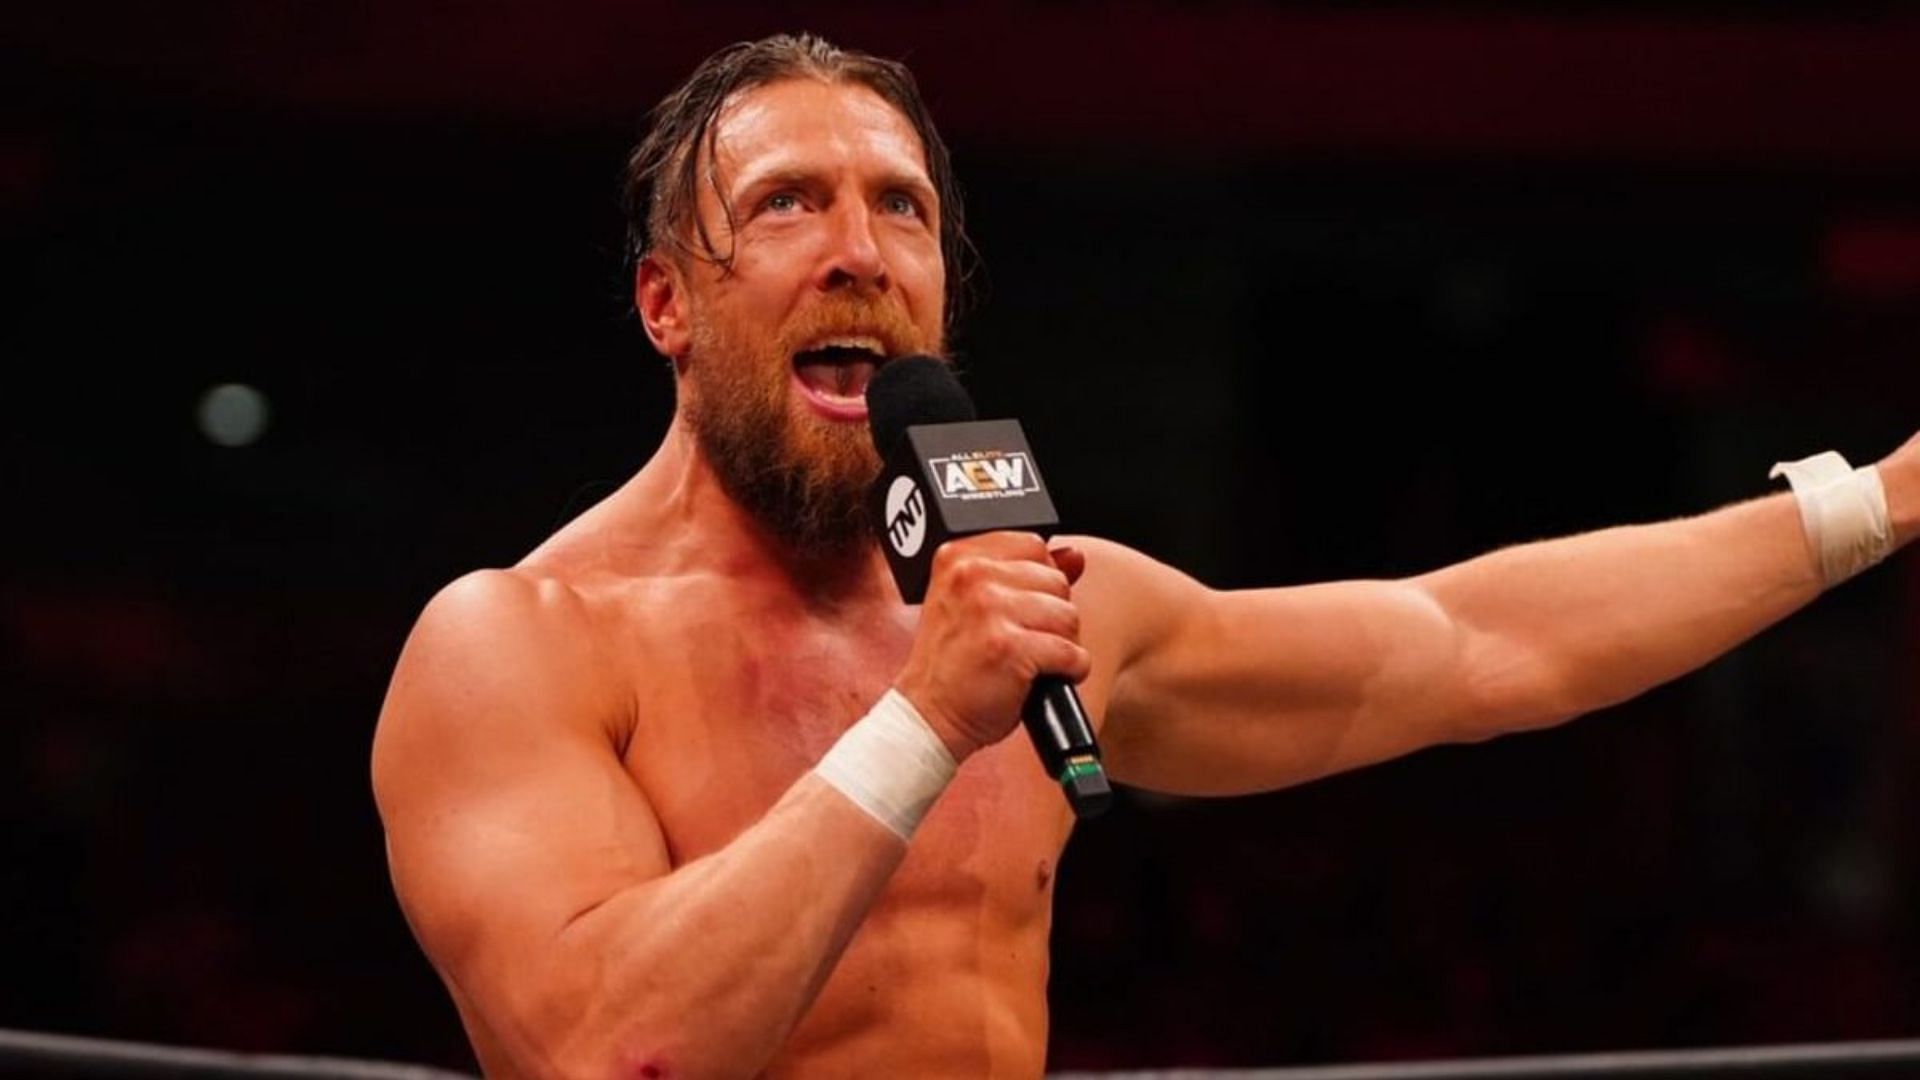 Will Bryan Danielson make it back in time for AEW Full Gear later this year?